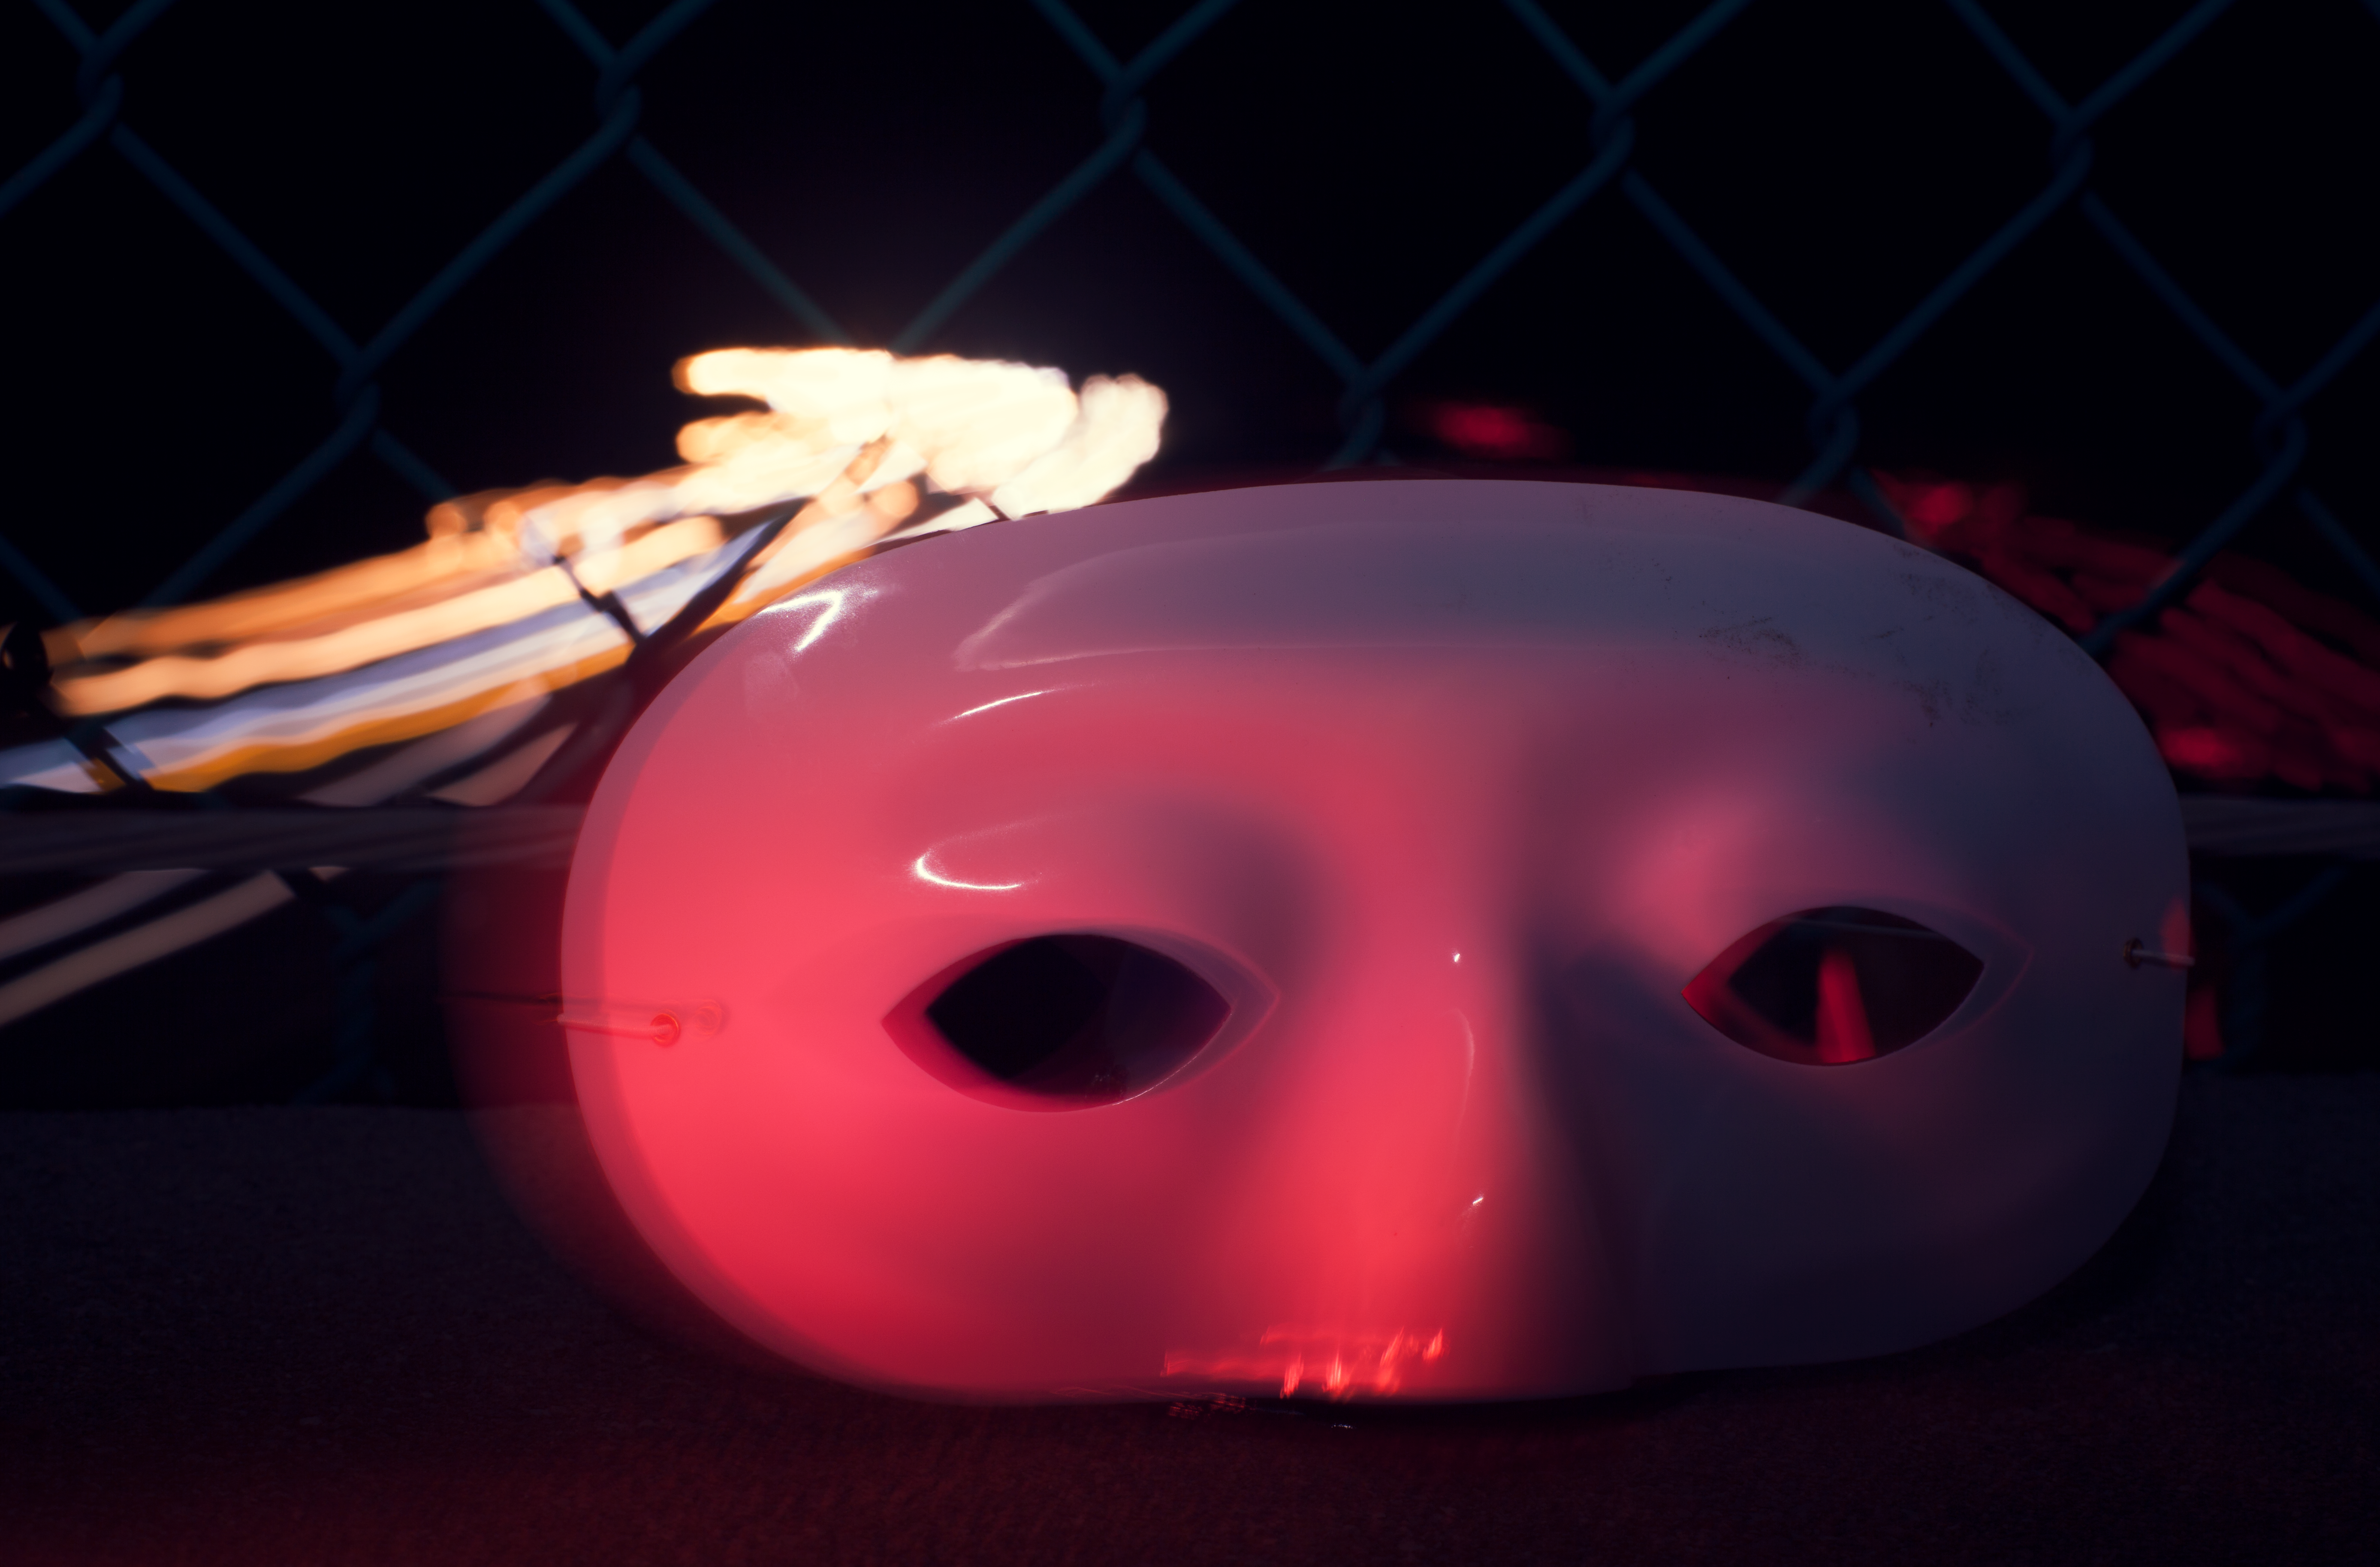 This is my conceptual photo of a mask illuminated by red light over a freeway of passing cars.